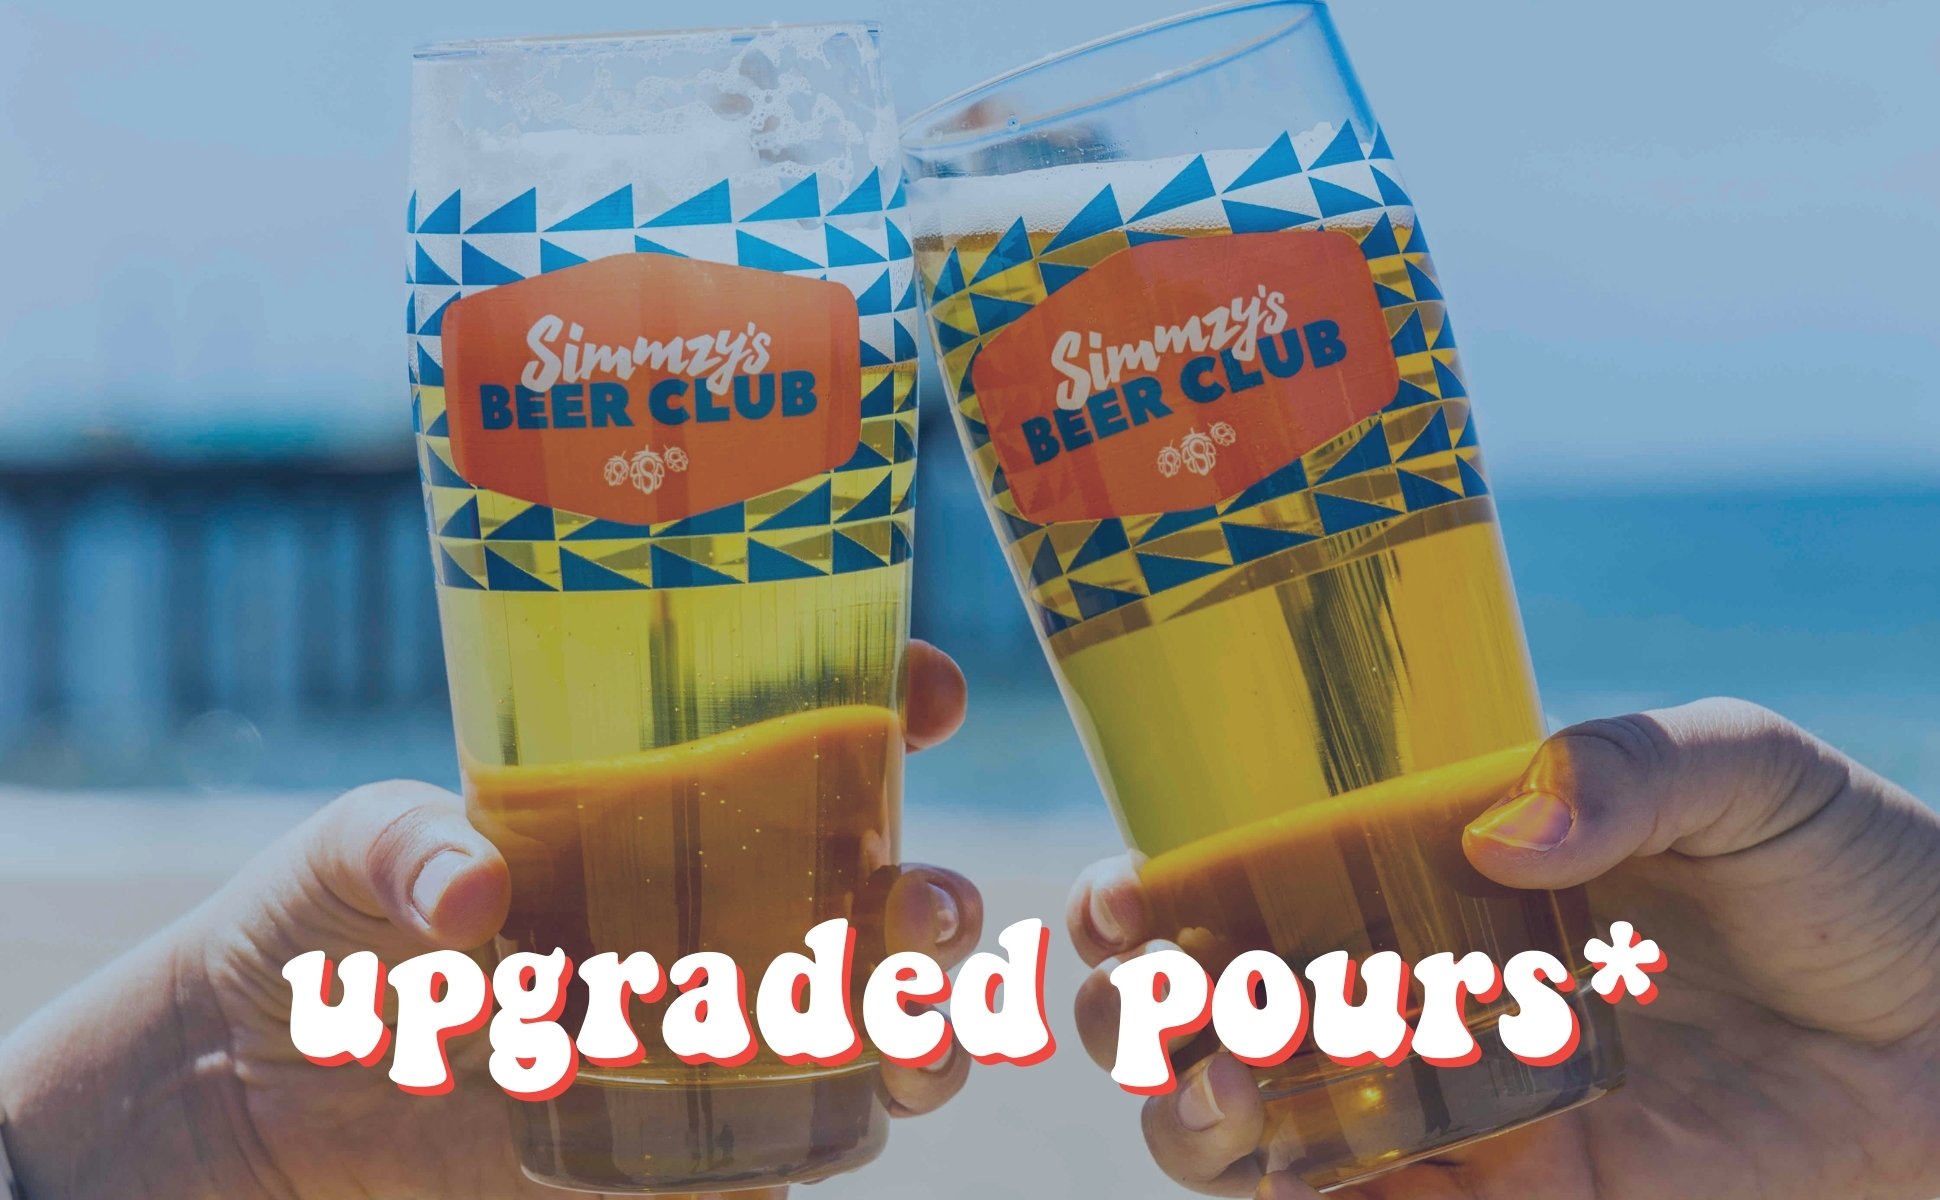 Simmzy's Beer Club Members get upgraded pours from 16oz. to 20oz. on all Simmzy's Beers.